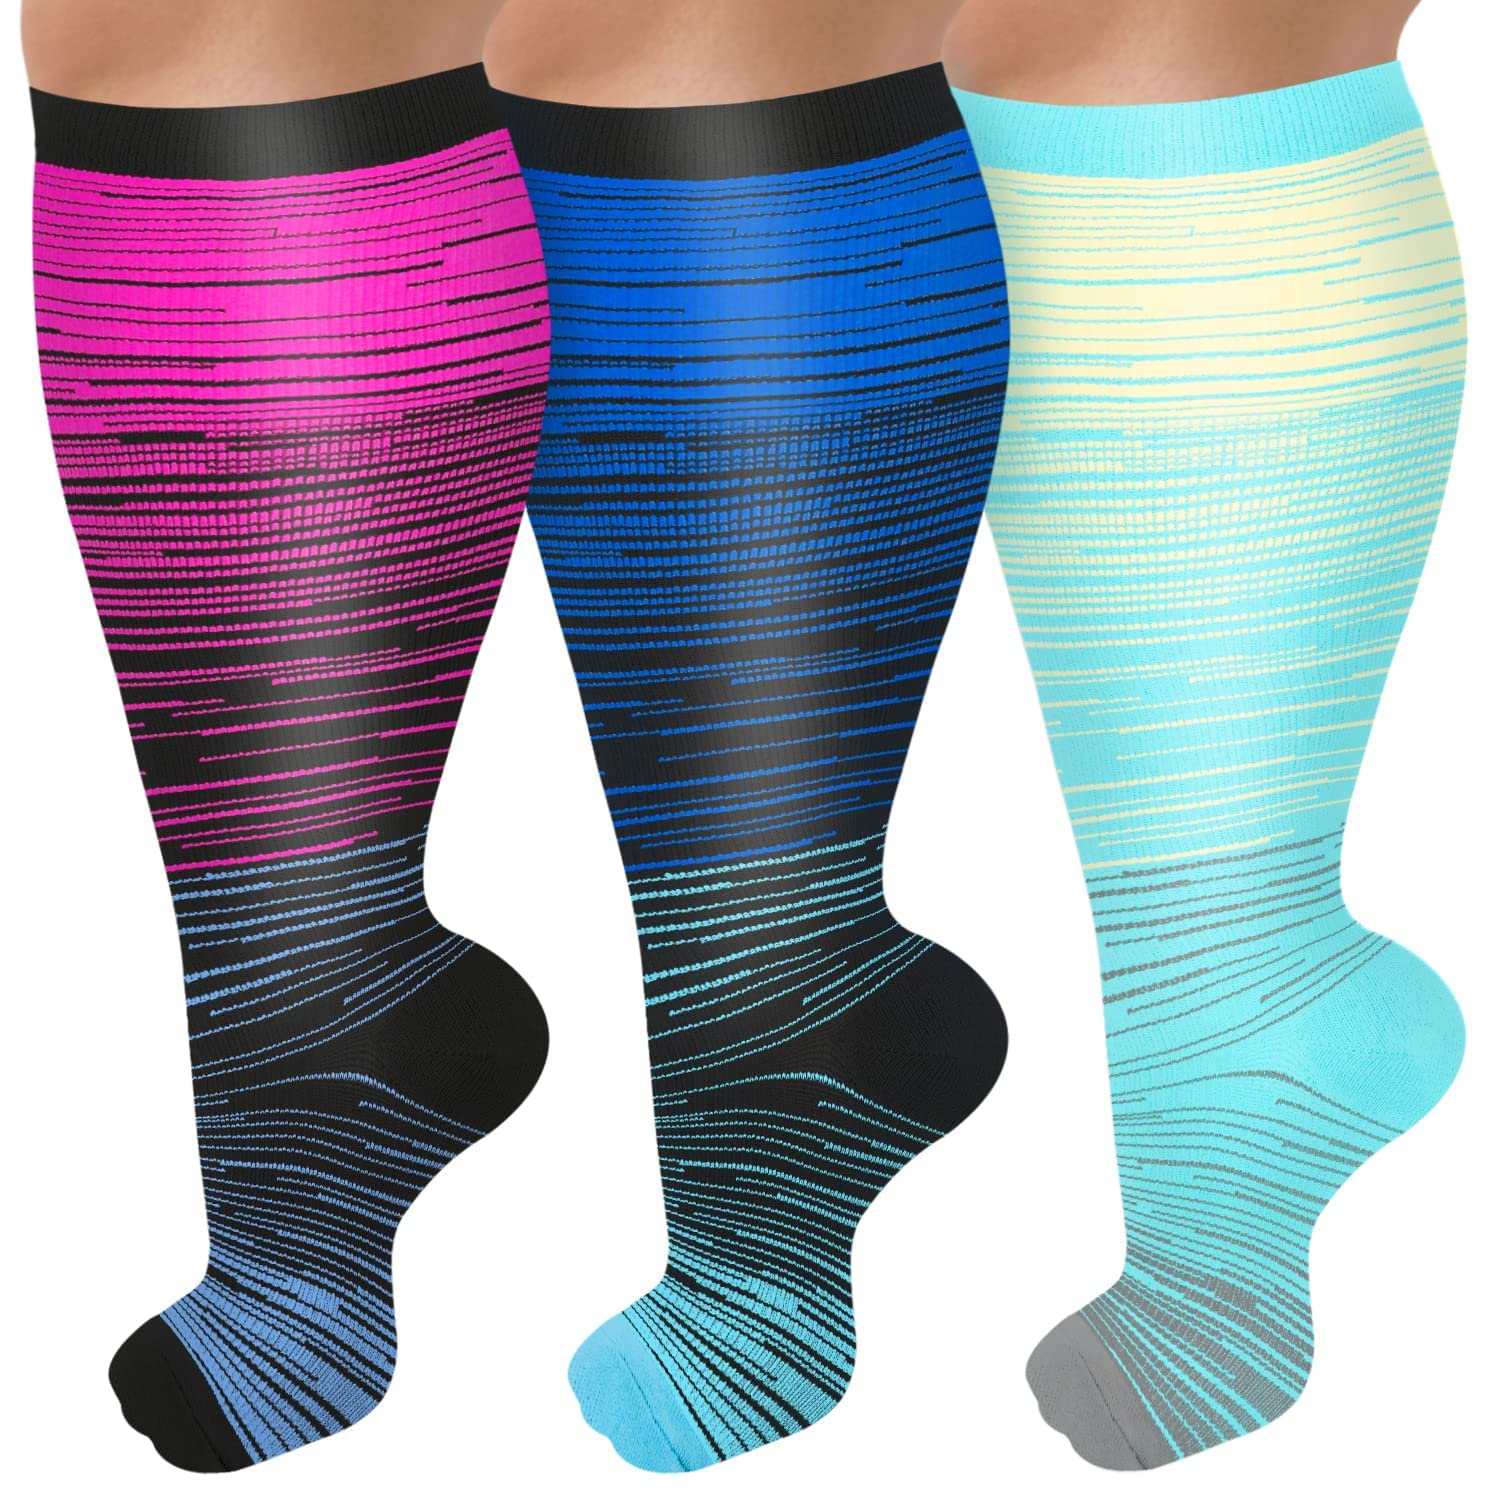 Diu Life 3 Pairs Plus Size Compression Socks for women & men Wide Calf  Extra Large Knee High Stockings for nurse sports fitness. XXL 3er-multi5